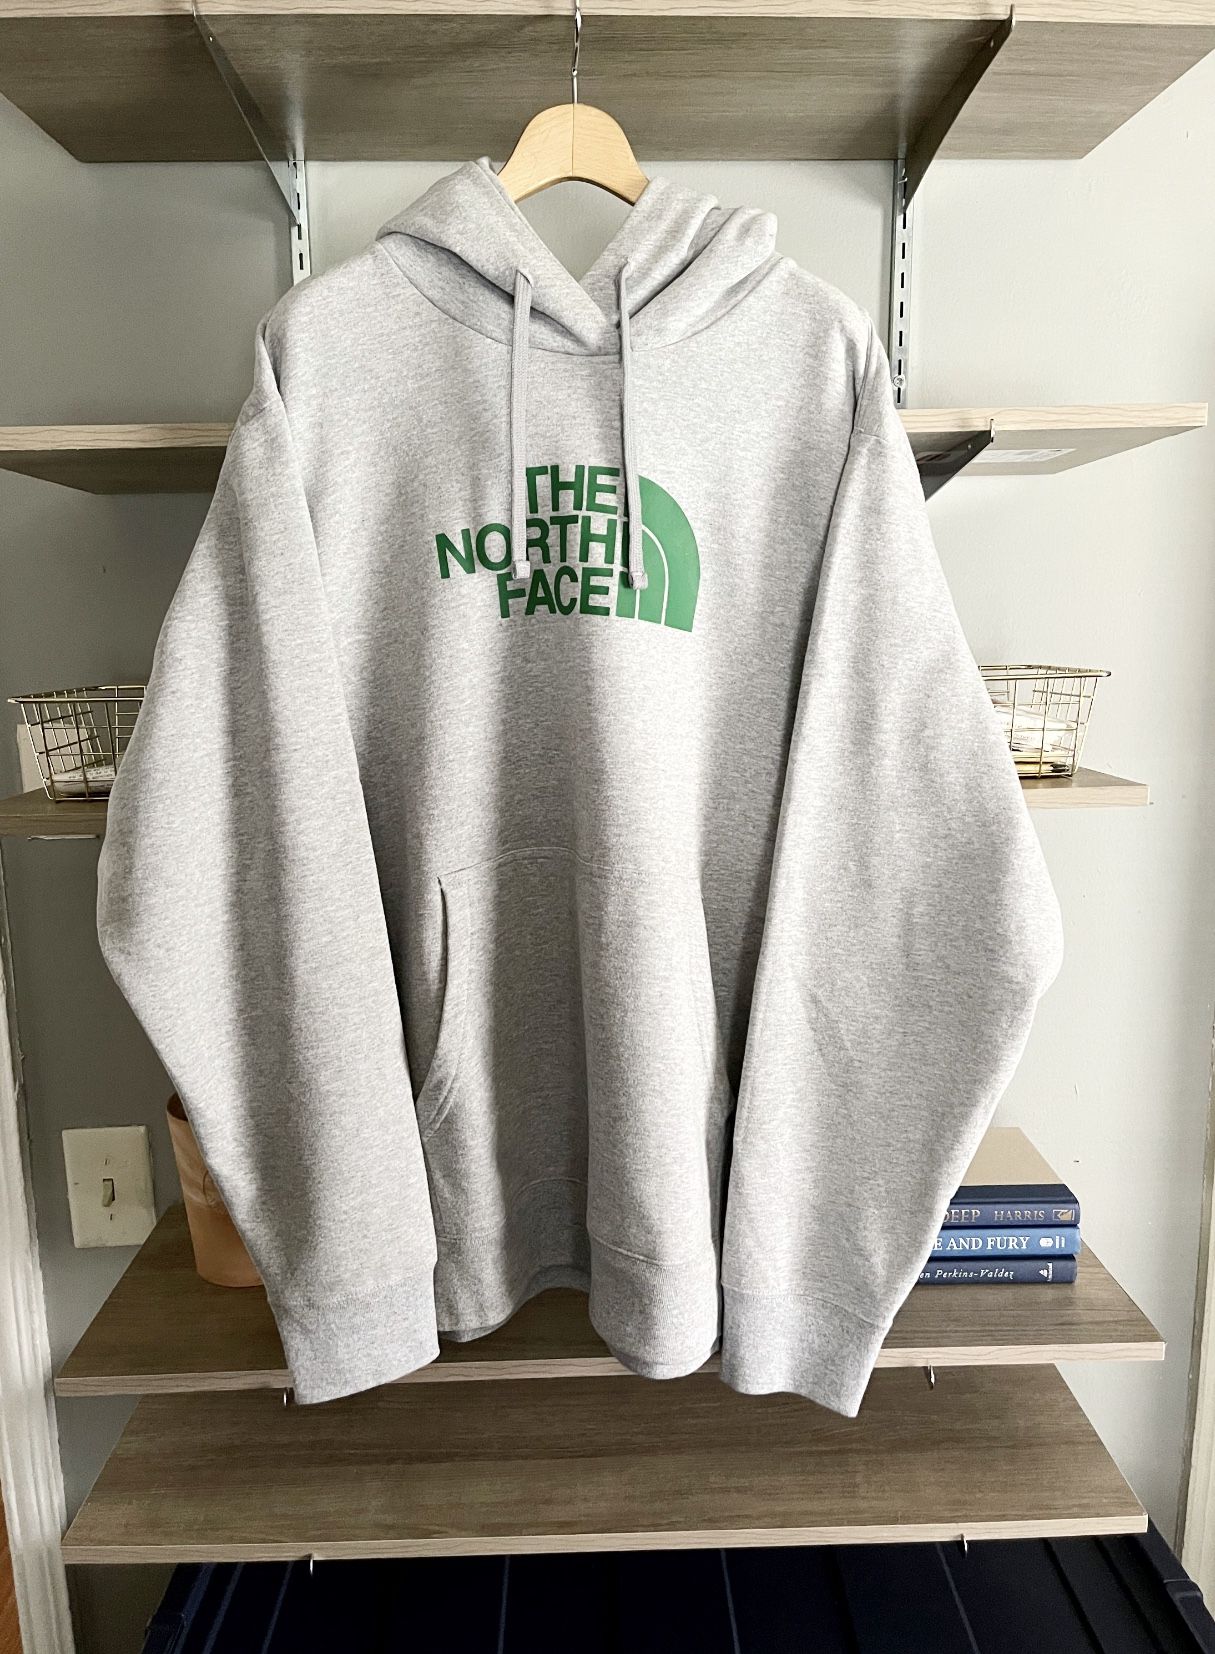 New! Mens North Face hoodie retail $80 size 2XL Brand new